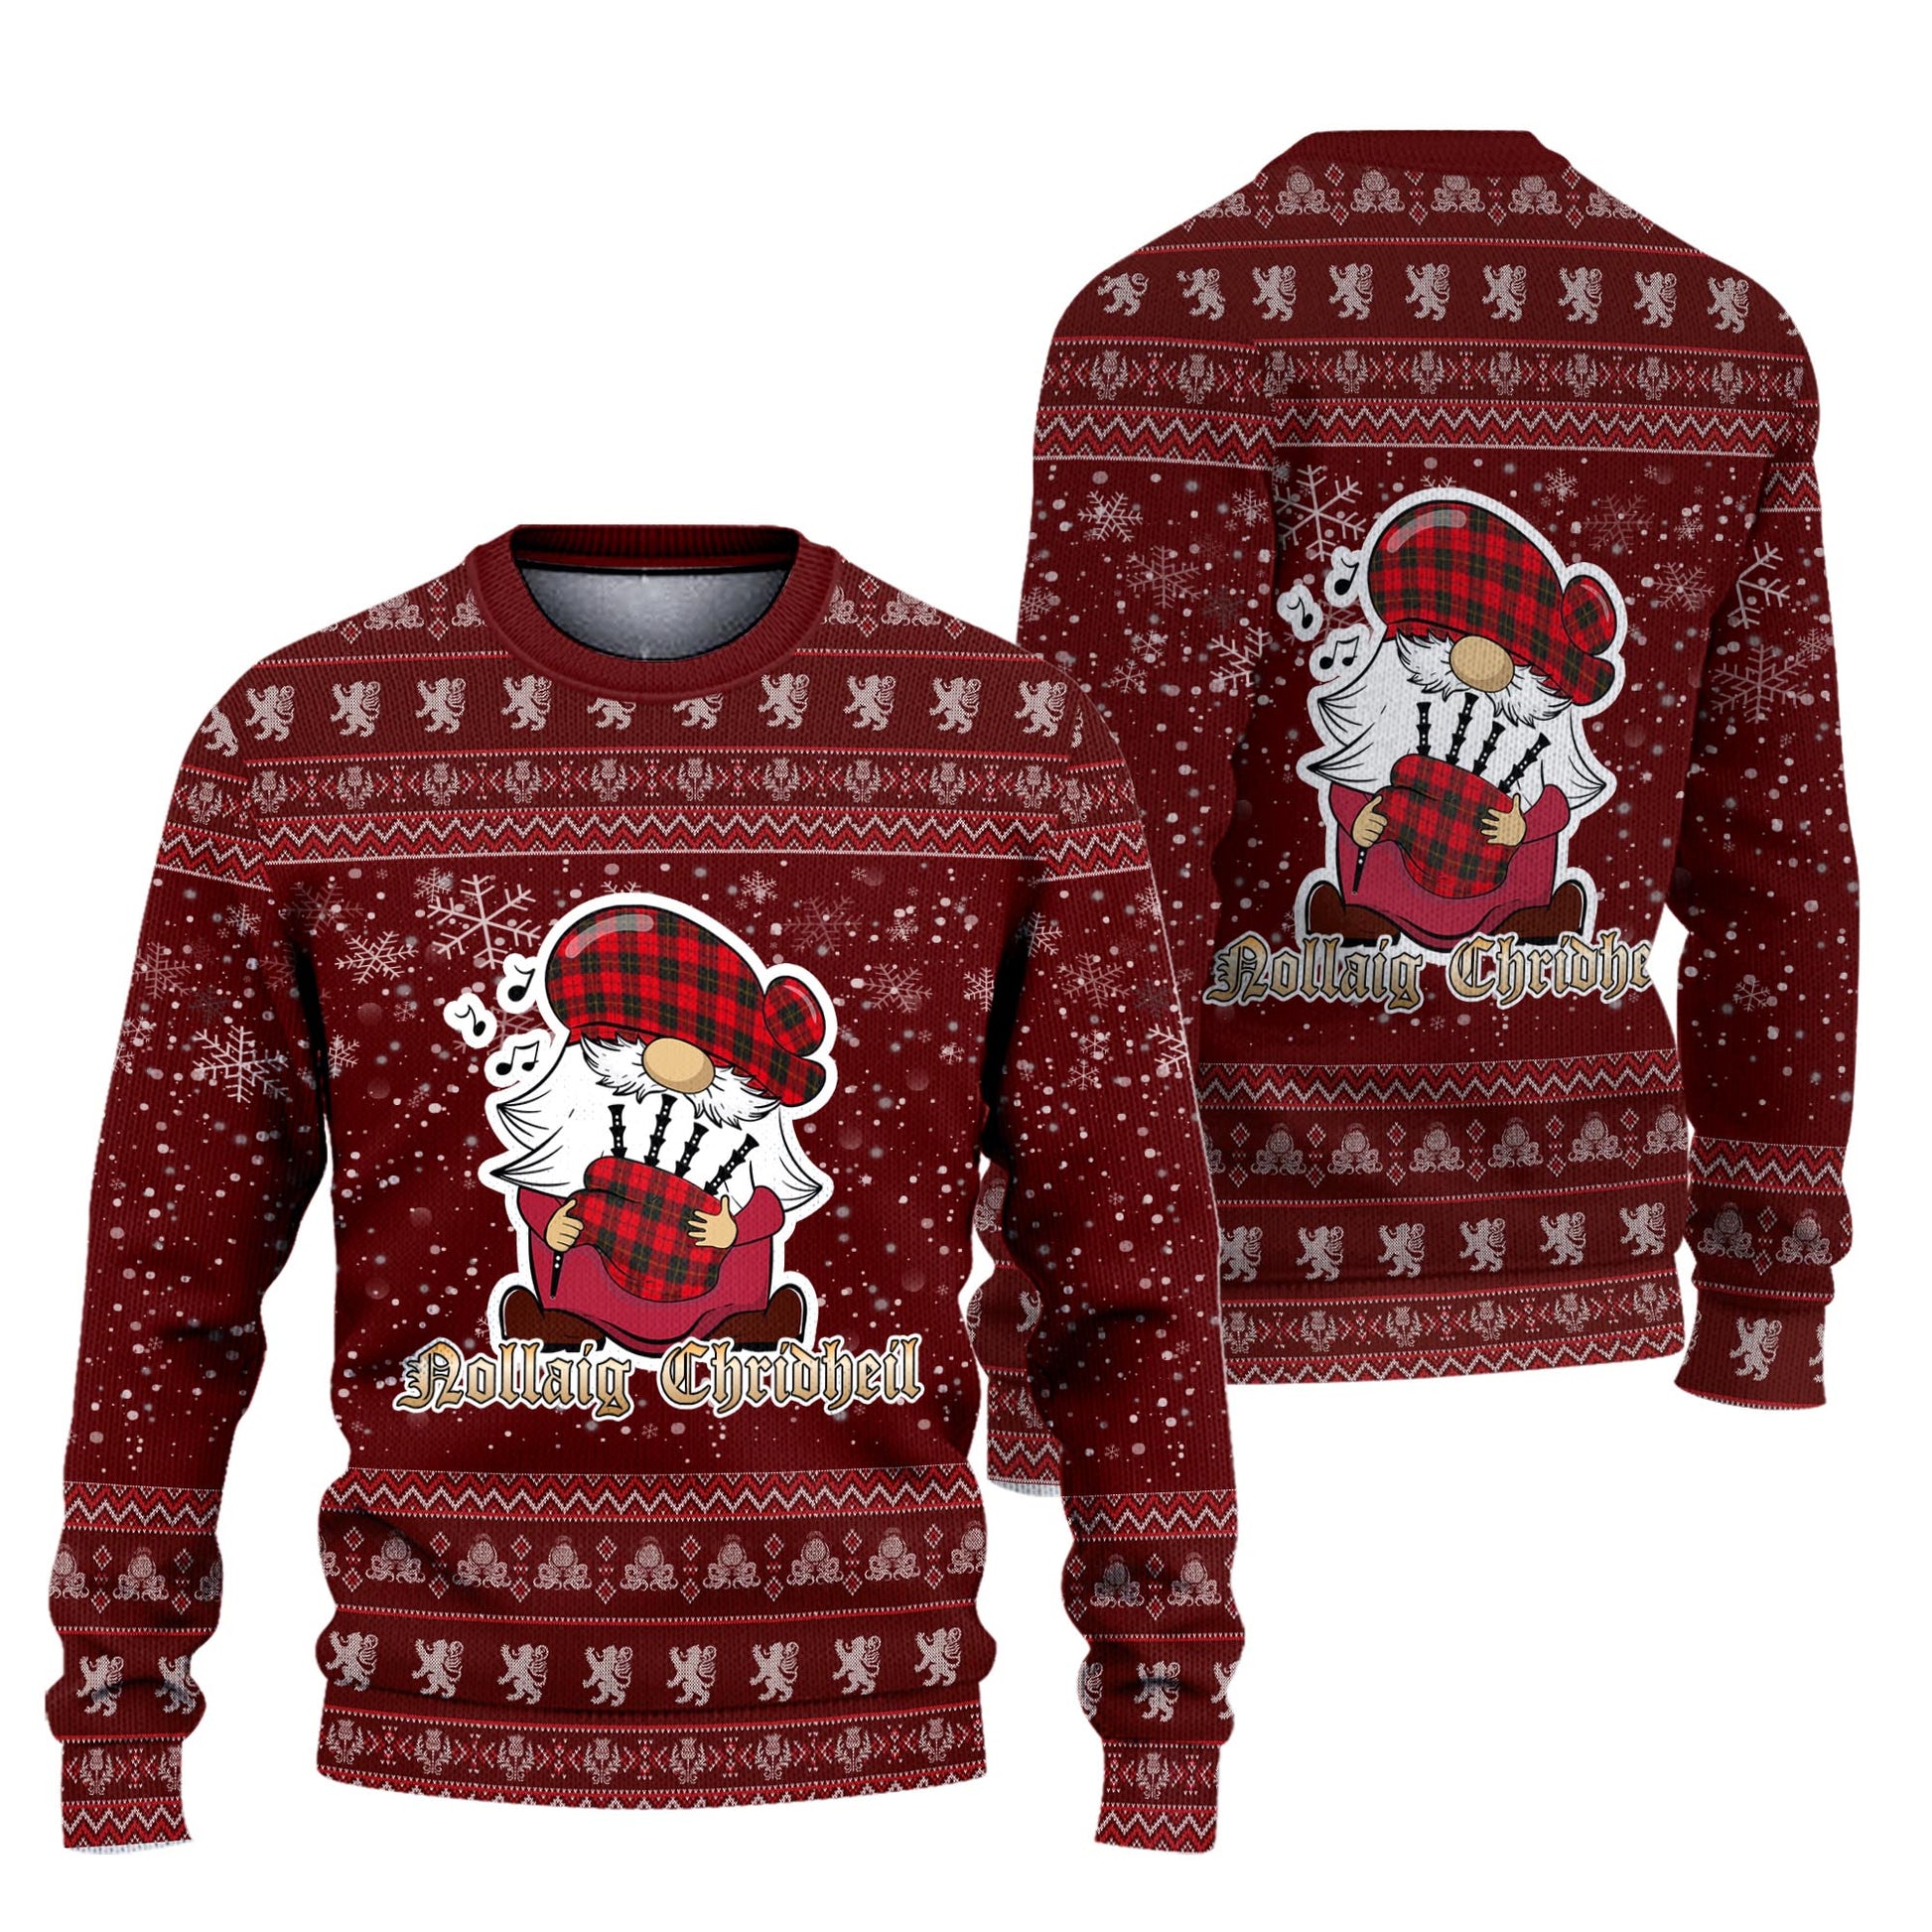 Wallace Weathered Clan Christmas Family Knitted Sweater with Funny Gnome Playing Bagpipes Unisex Red - Tartanvibesclothing